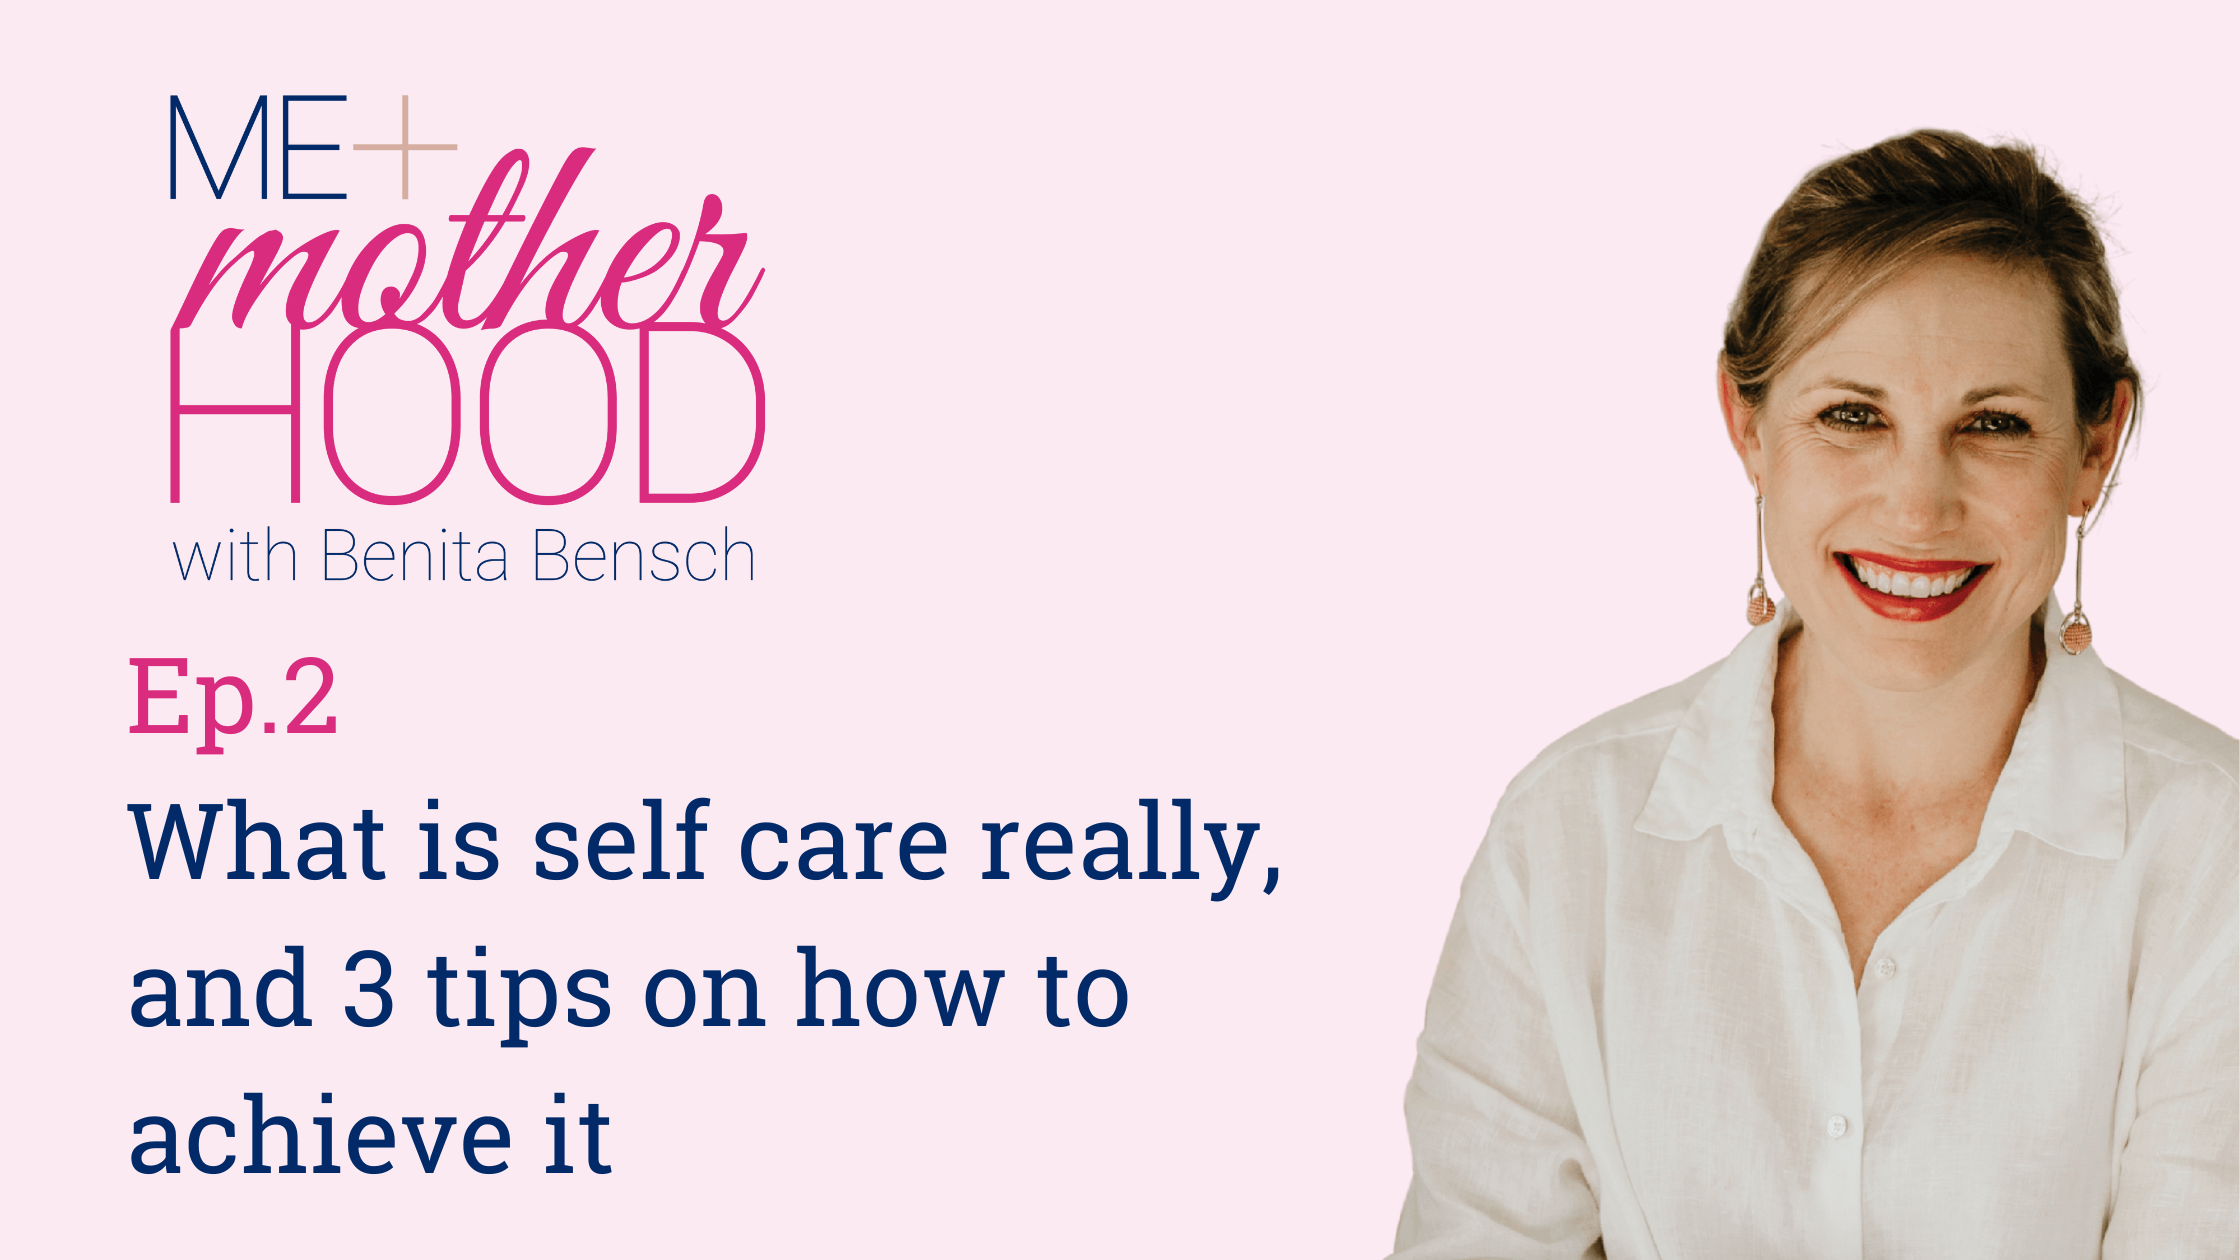 What is self care really, and 3 tips on how to achieve it